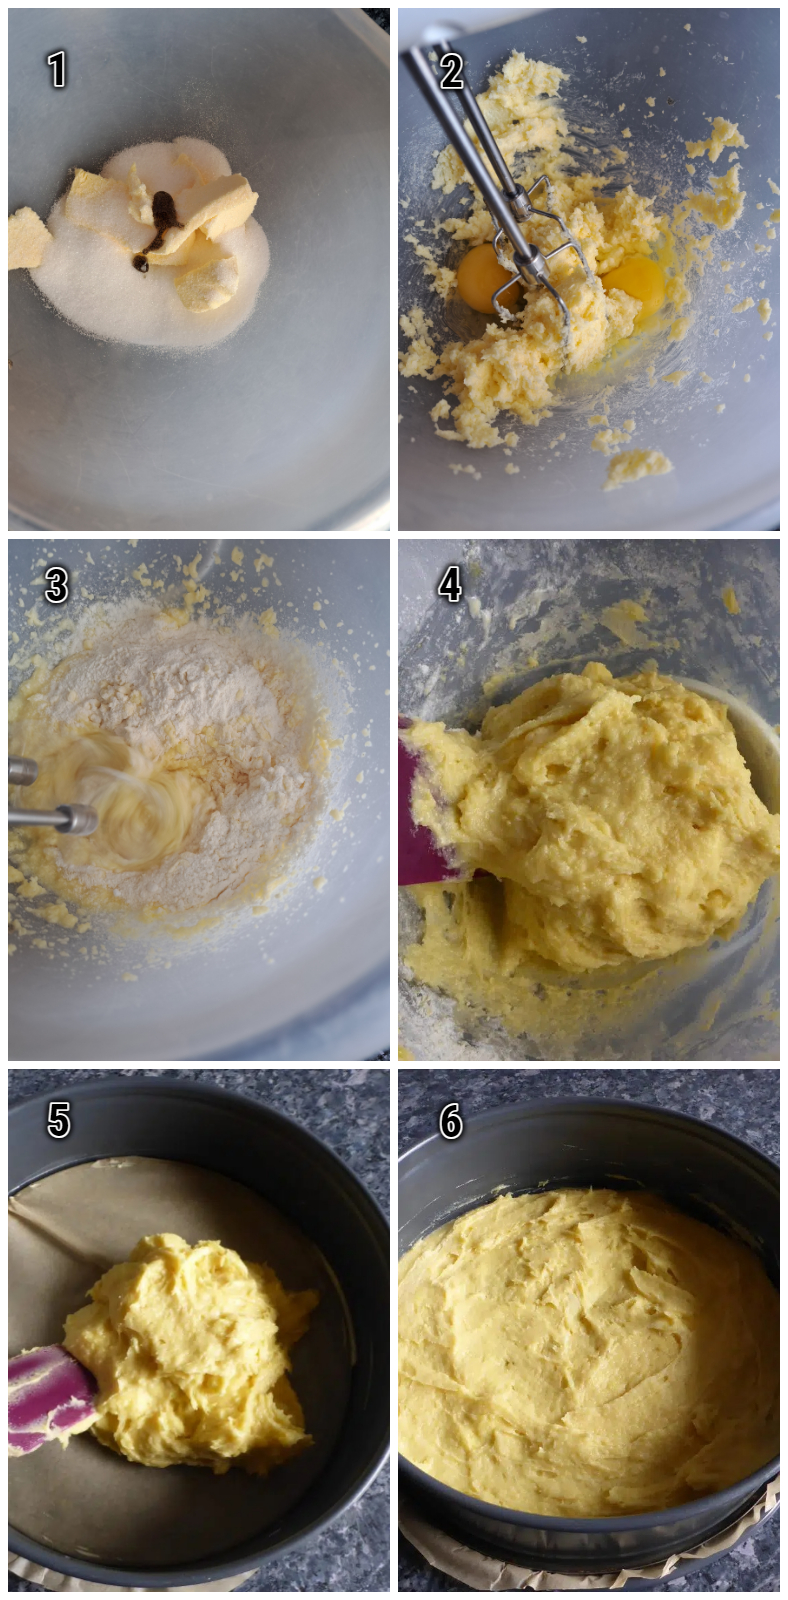 How to make flufy and moist cake batter for a fruity cake with pudding.